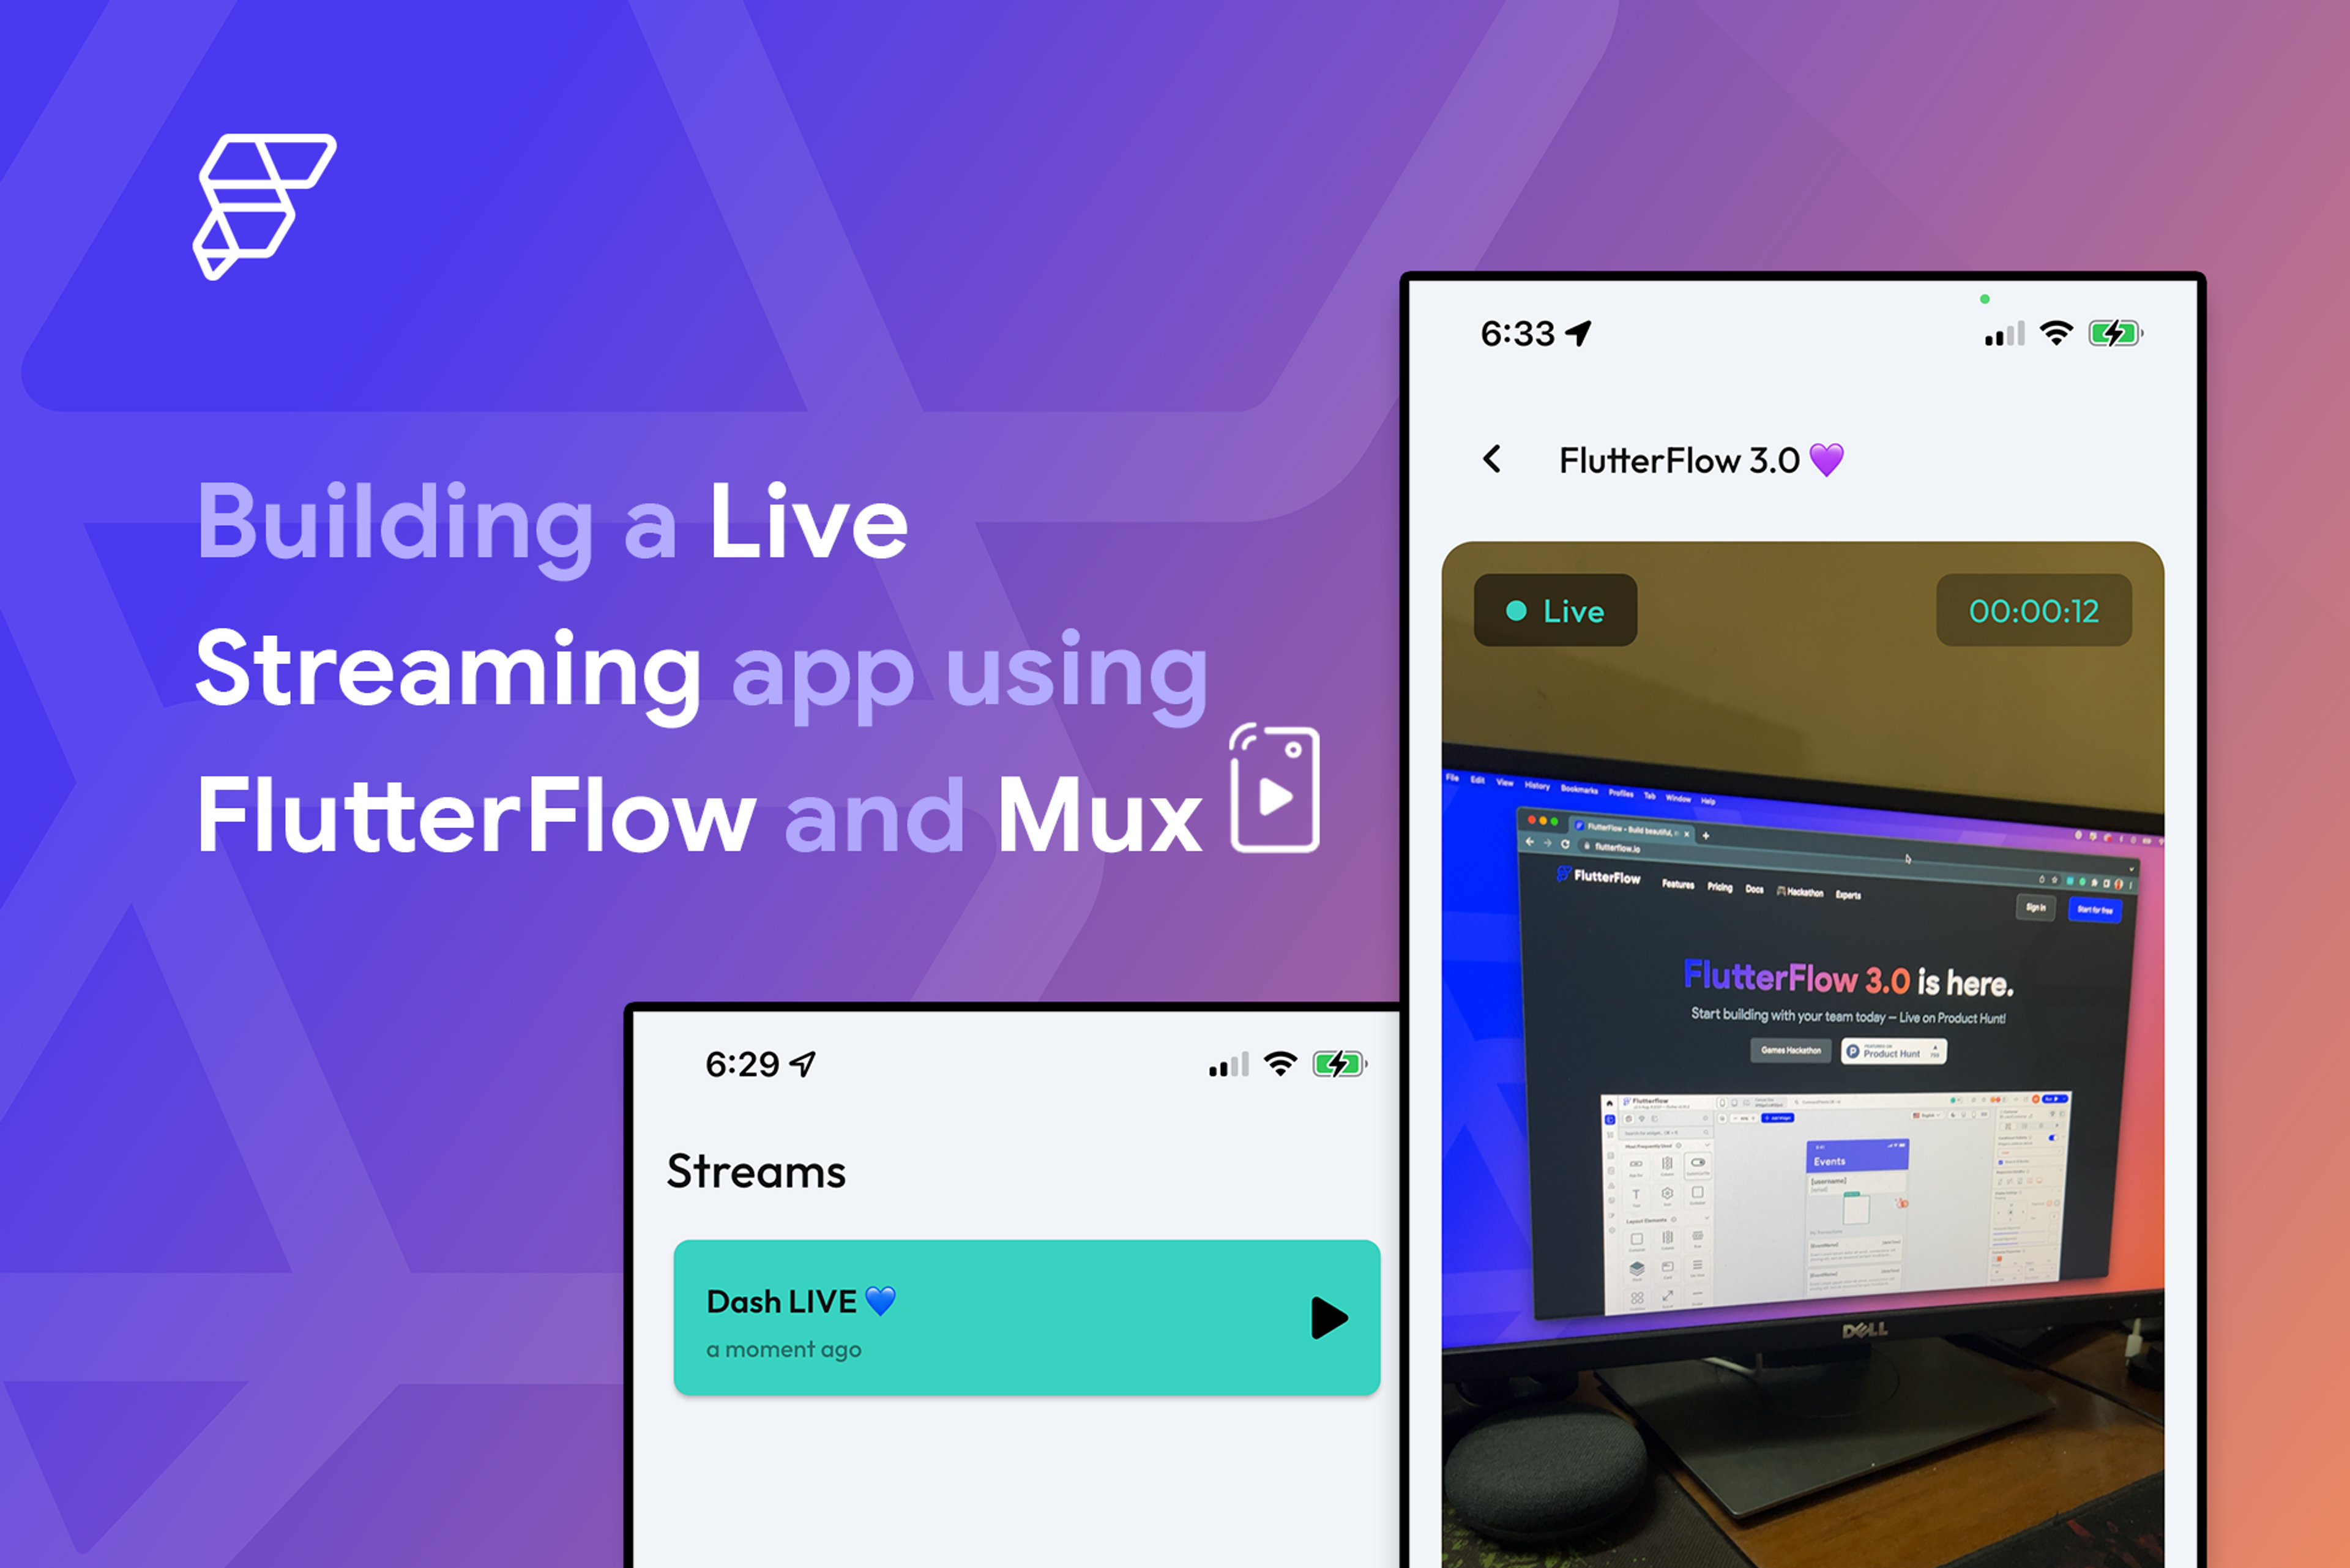 Build a live streaming app with FlutterFlow and Mux